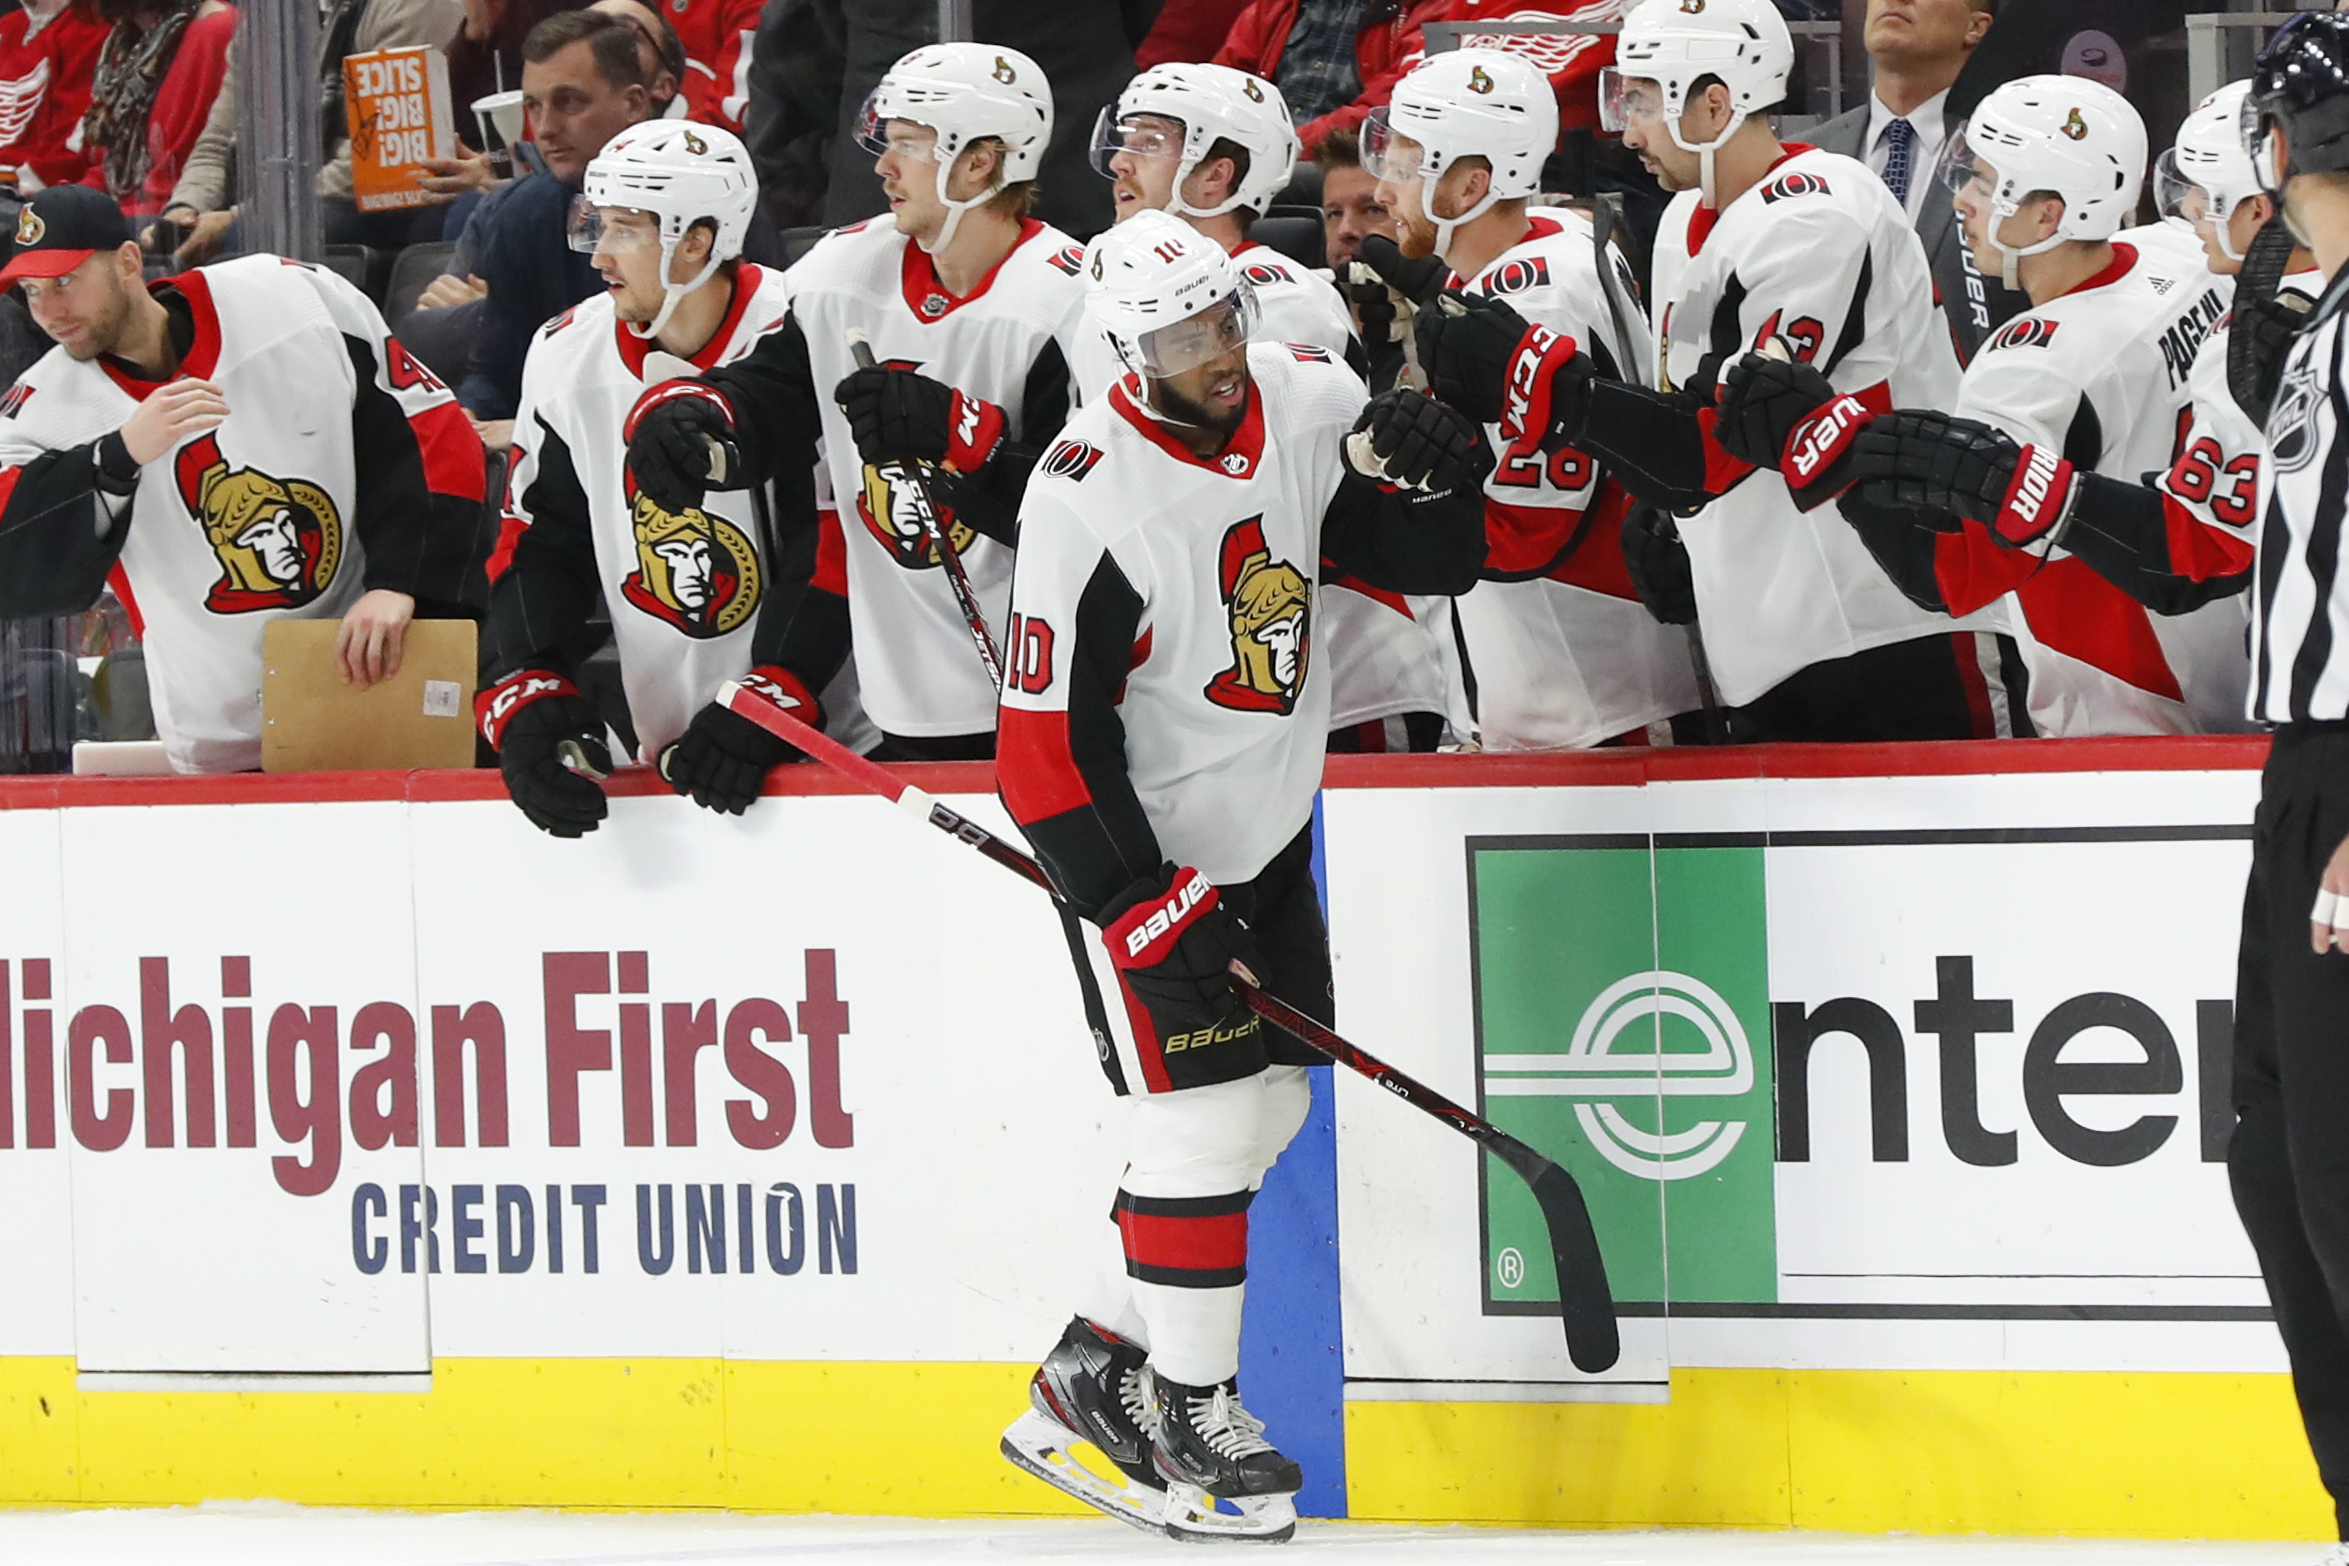 Duclair scores twice, leads Senators over Red Wings 4-3